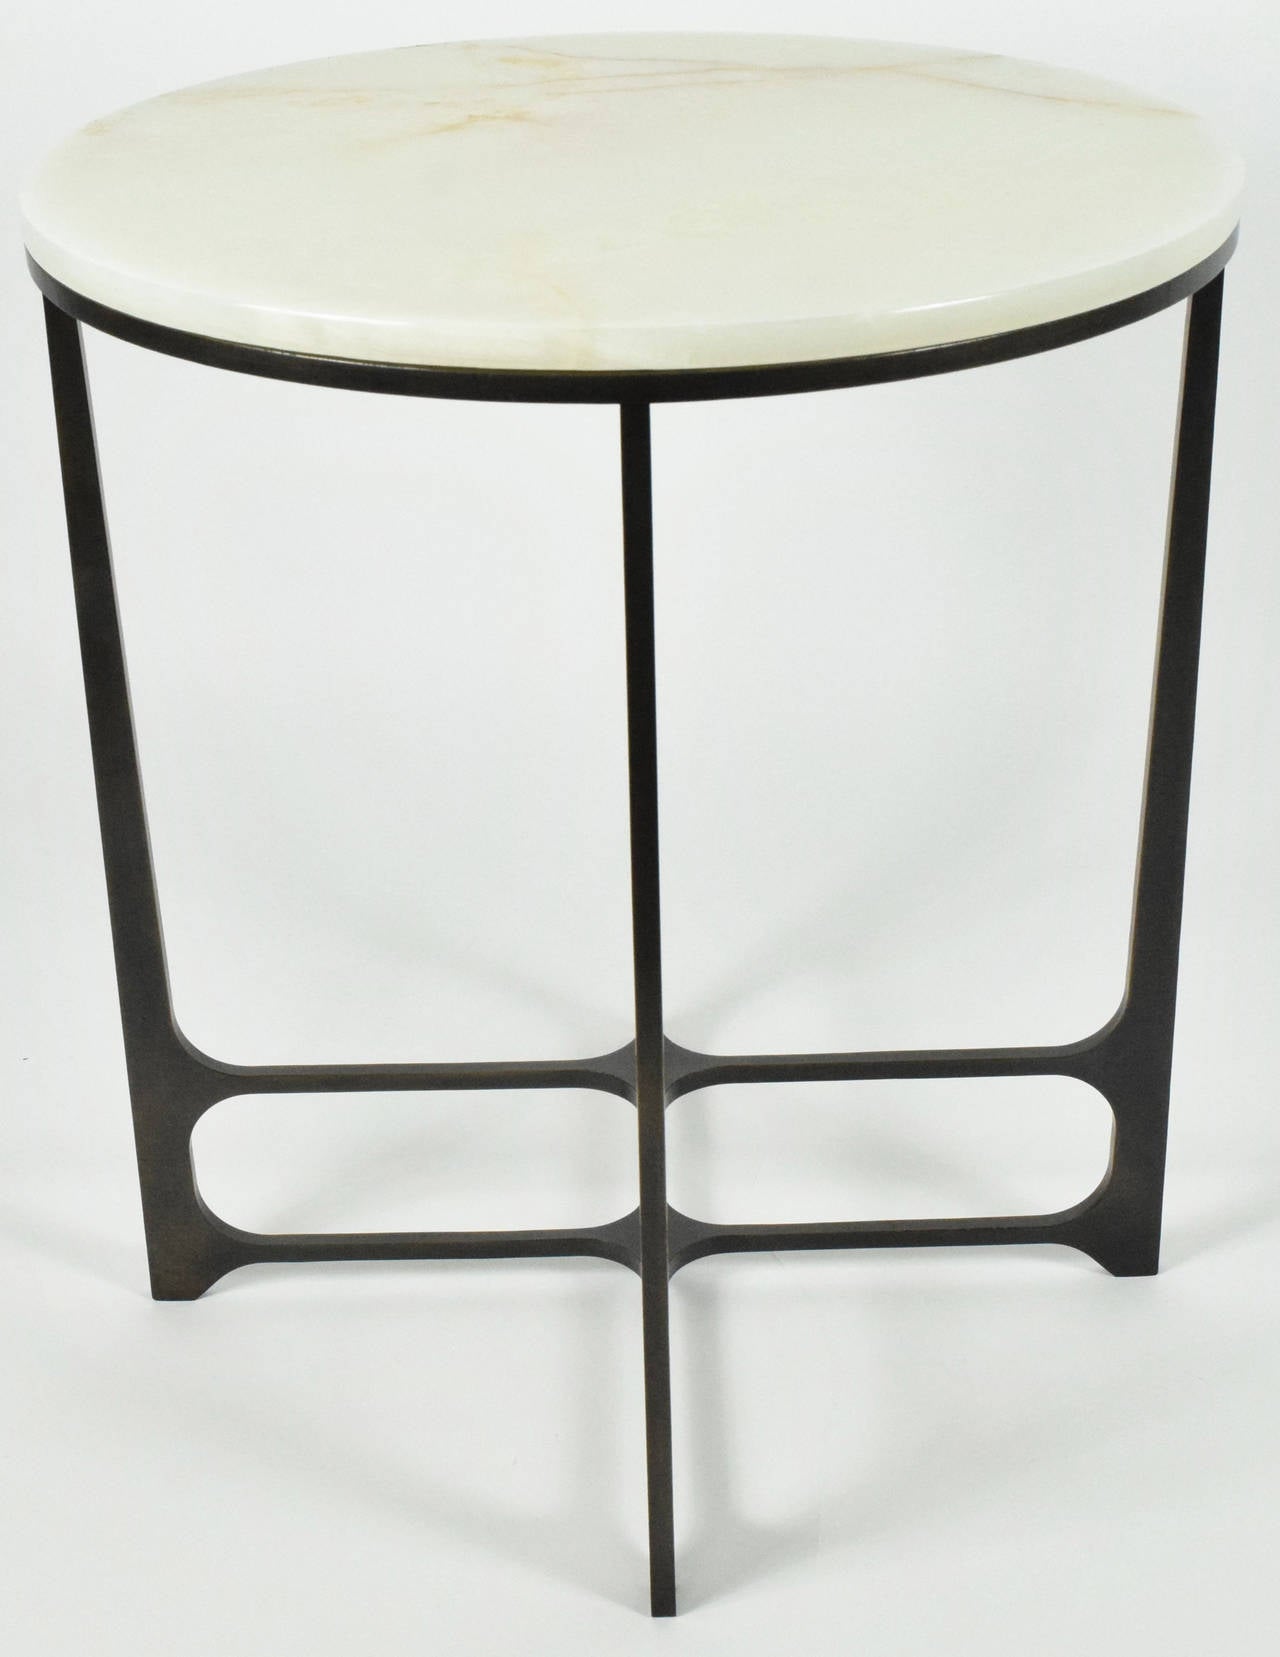 Modern William Yeoward Malvina Side Table with Onyx Top and Bronze Base